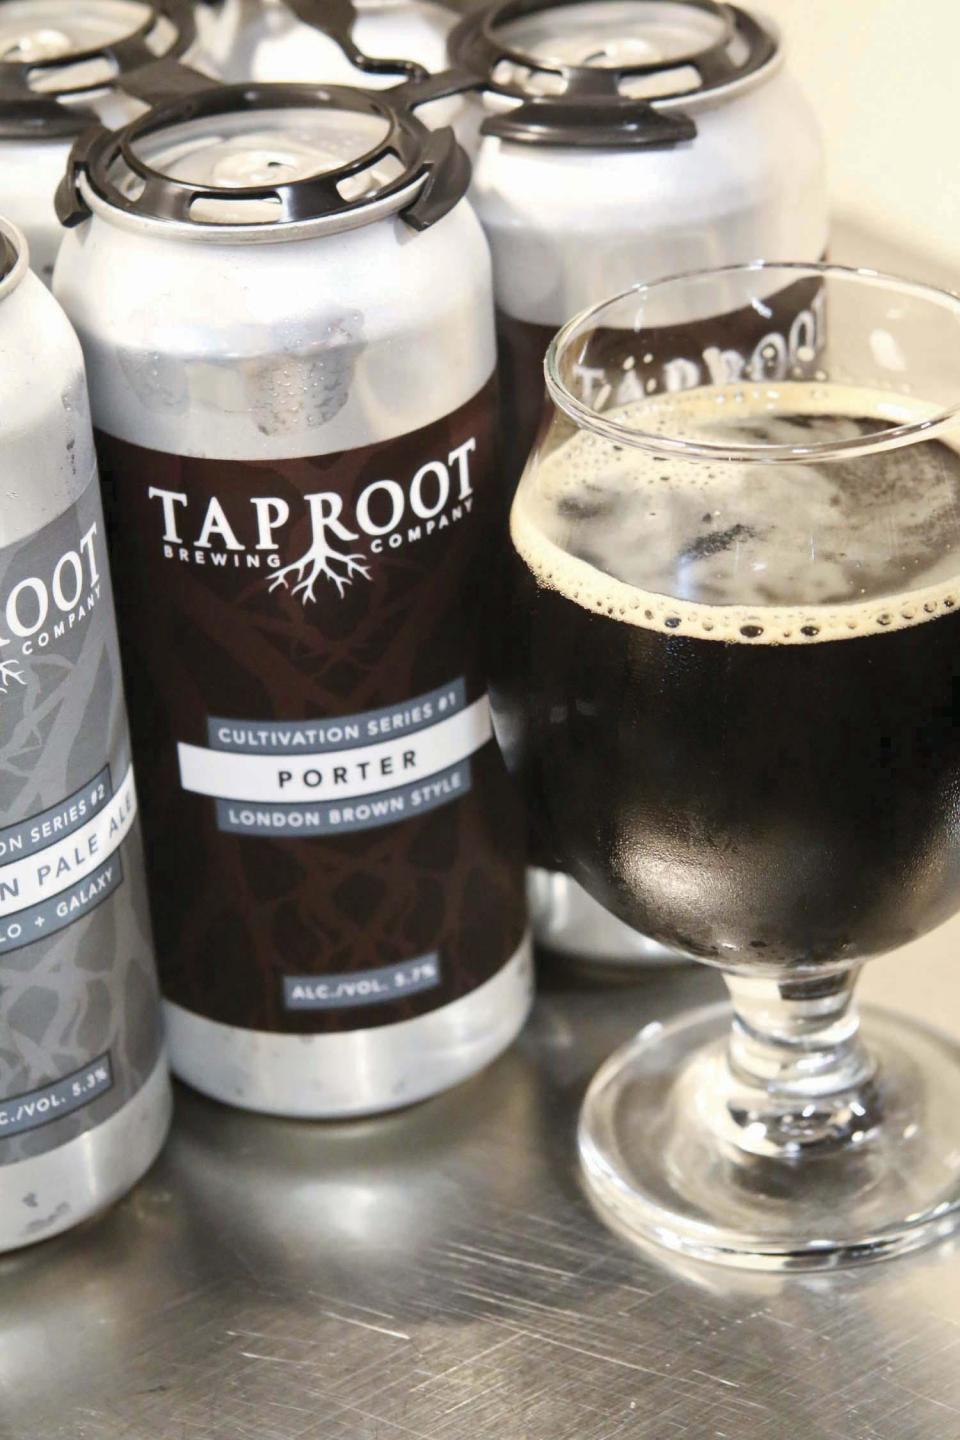 Check out the beer hall at Taproot Brewery.